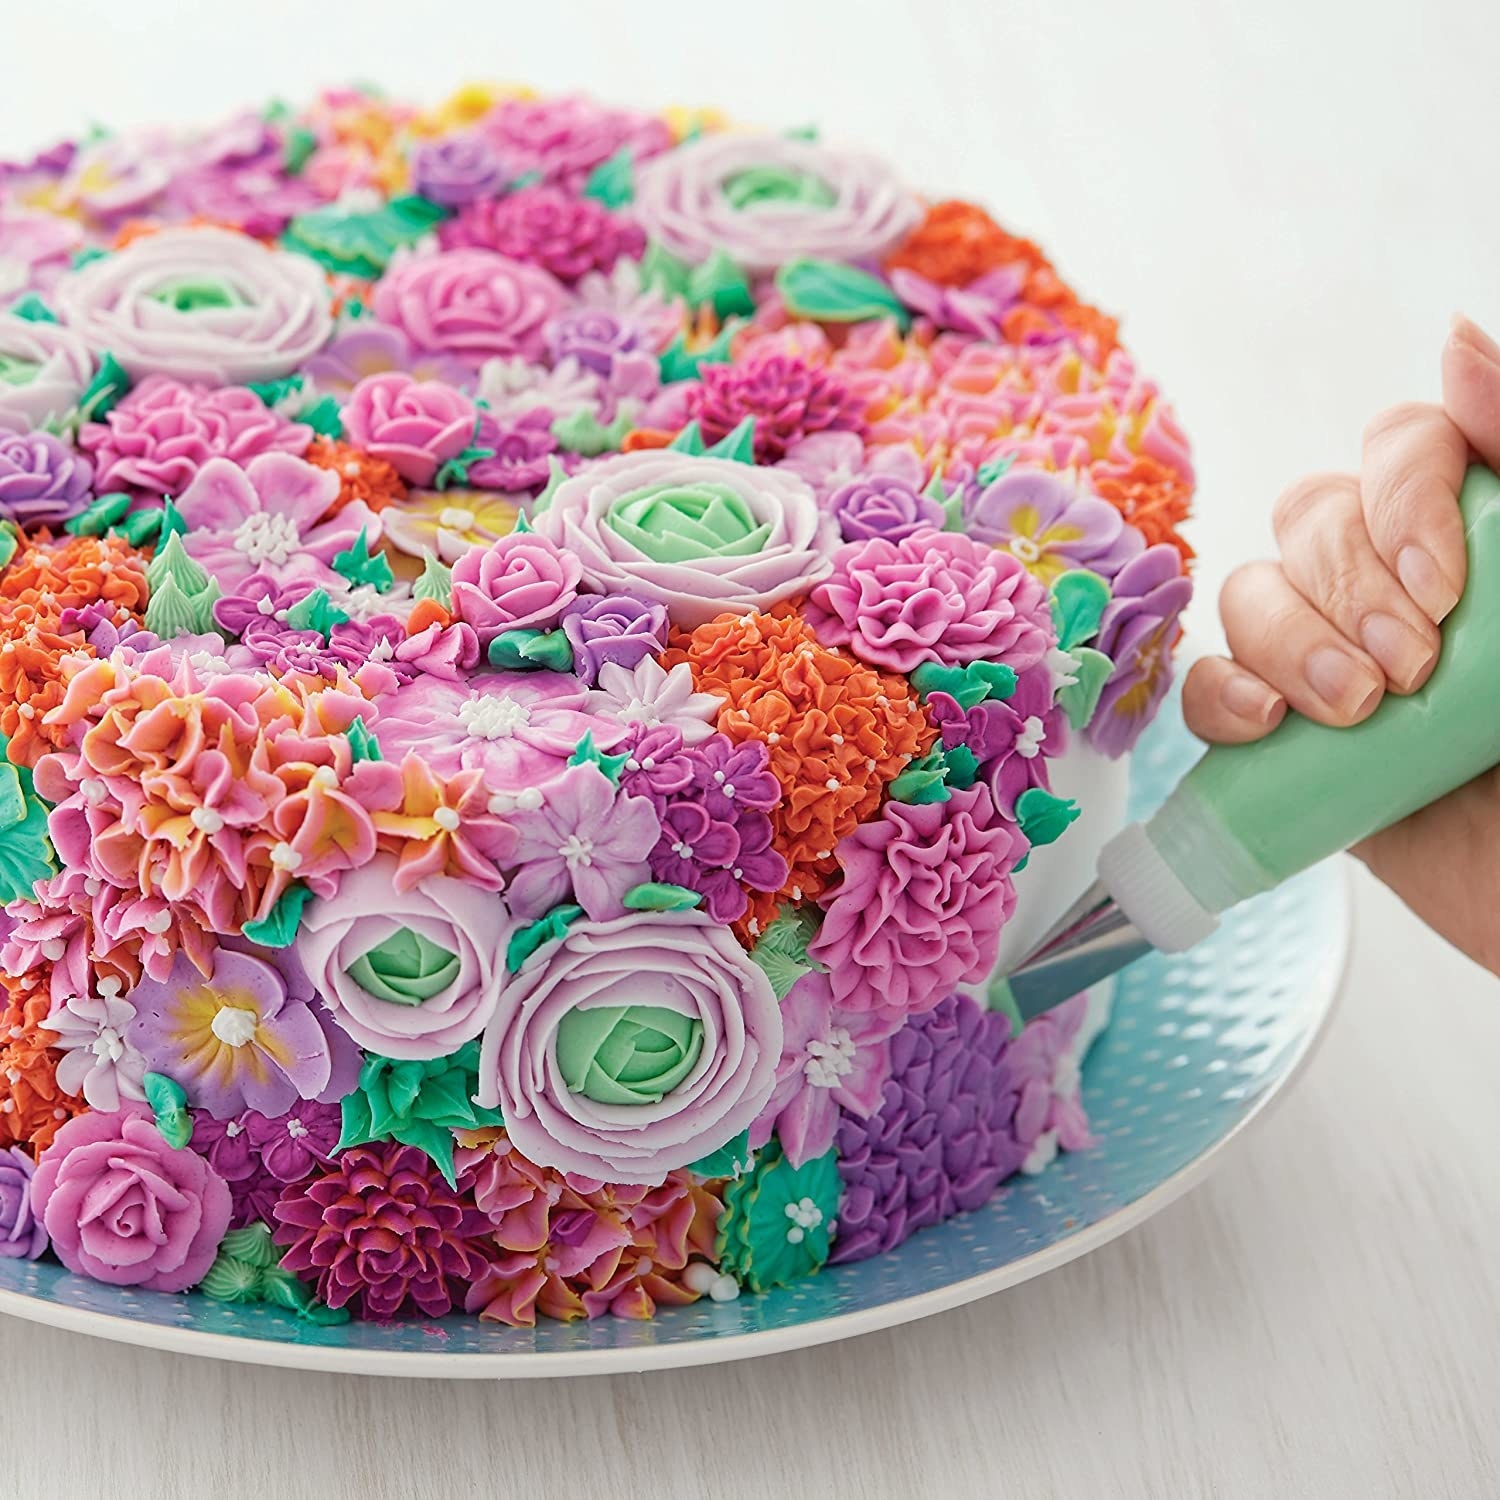 Person decorating cake with multicolored frosting flowers